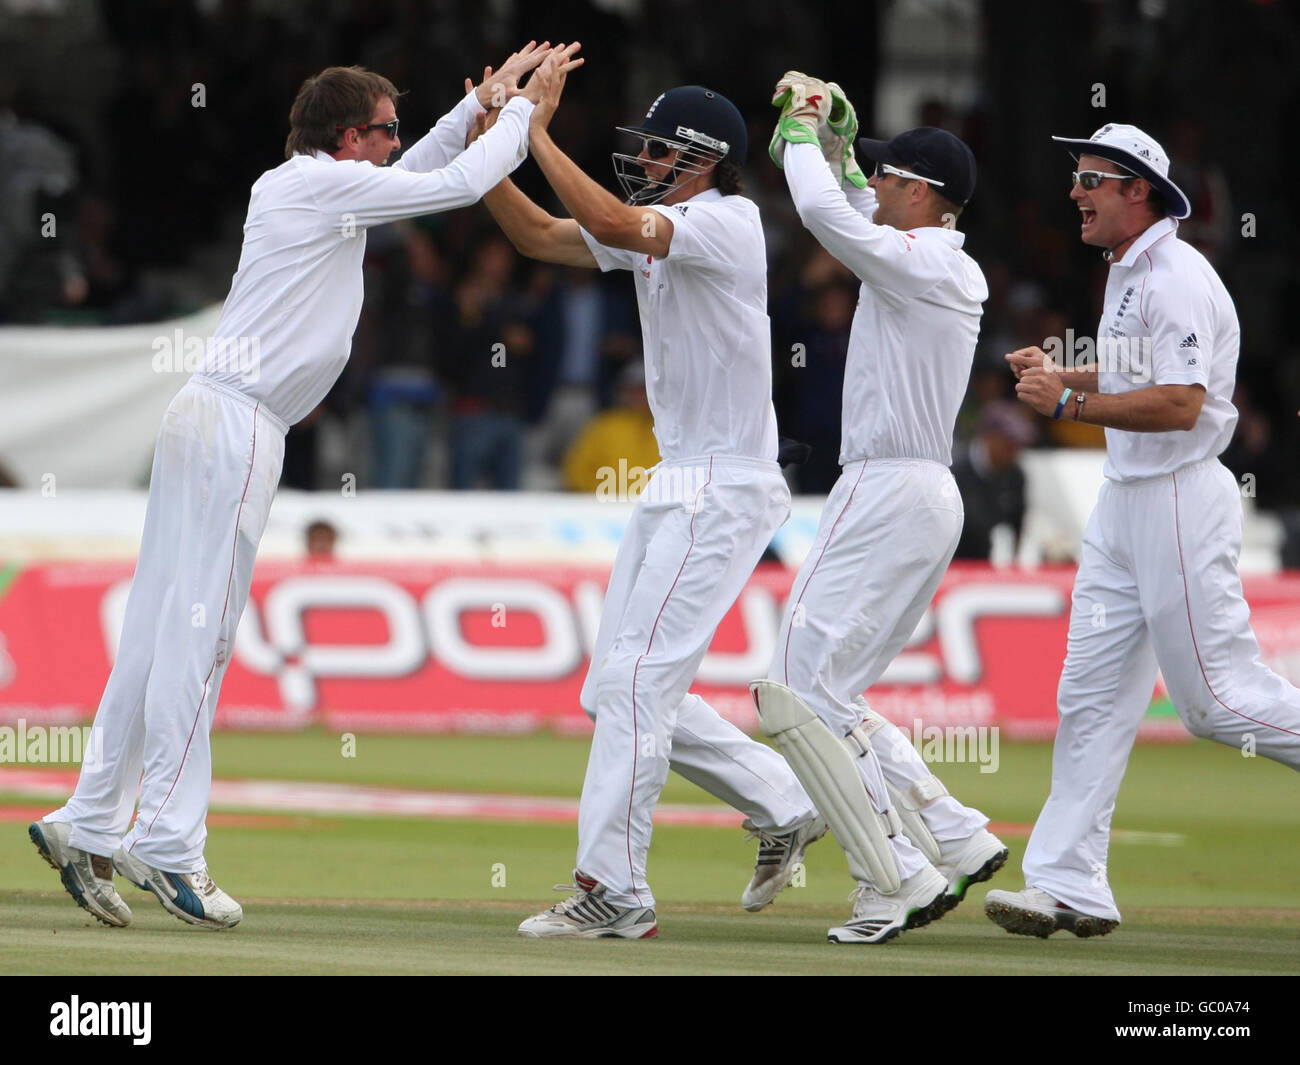 England bowler Graeme Swann (left) celebrates after taking key wicket of Australia batsman Michael Clarke with Alastair Cook, Matt Prior and Andrew Stauss (right) during the fifth day of the second npower Test match at Lord's, London. Stock Photo